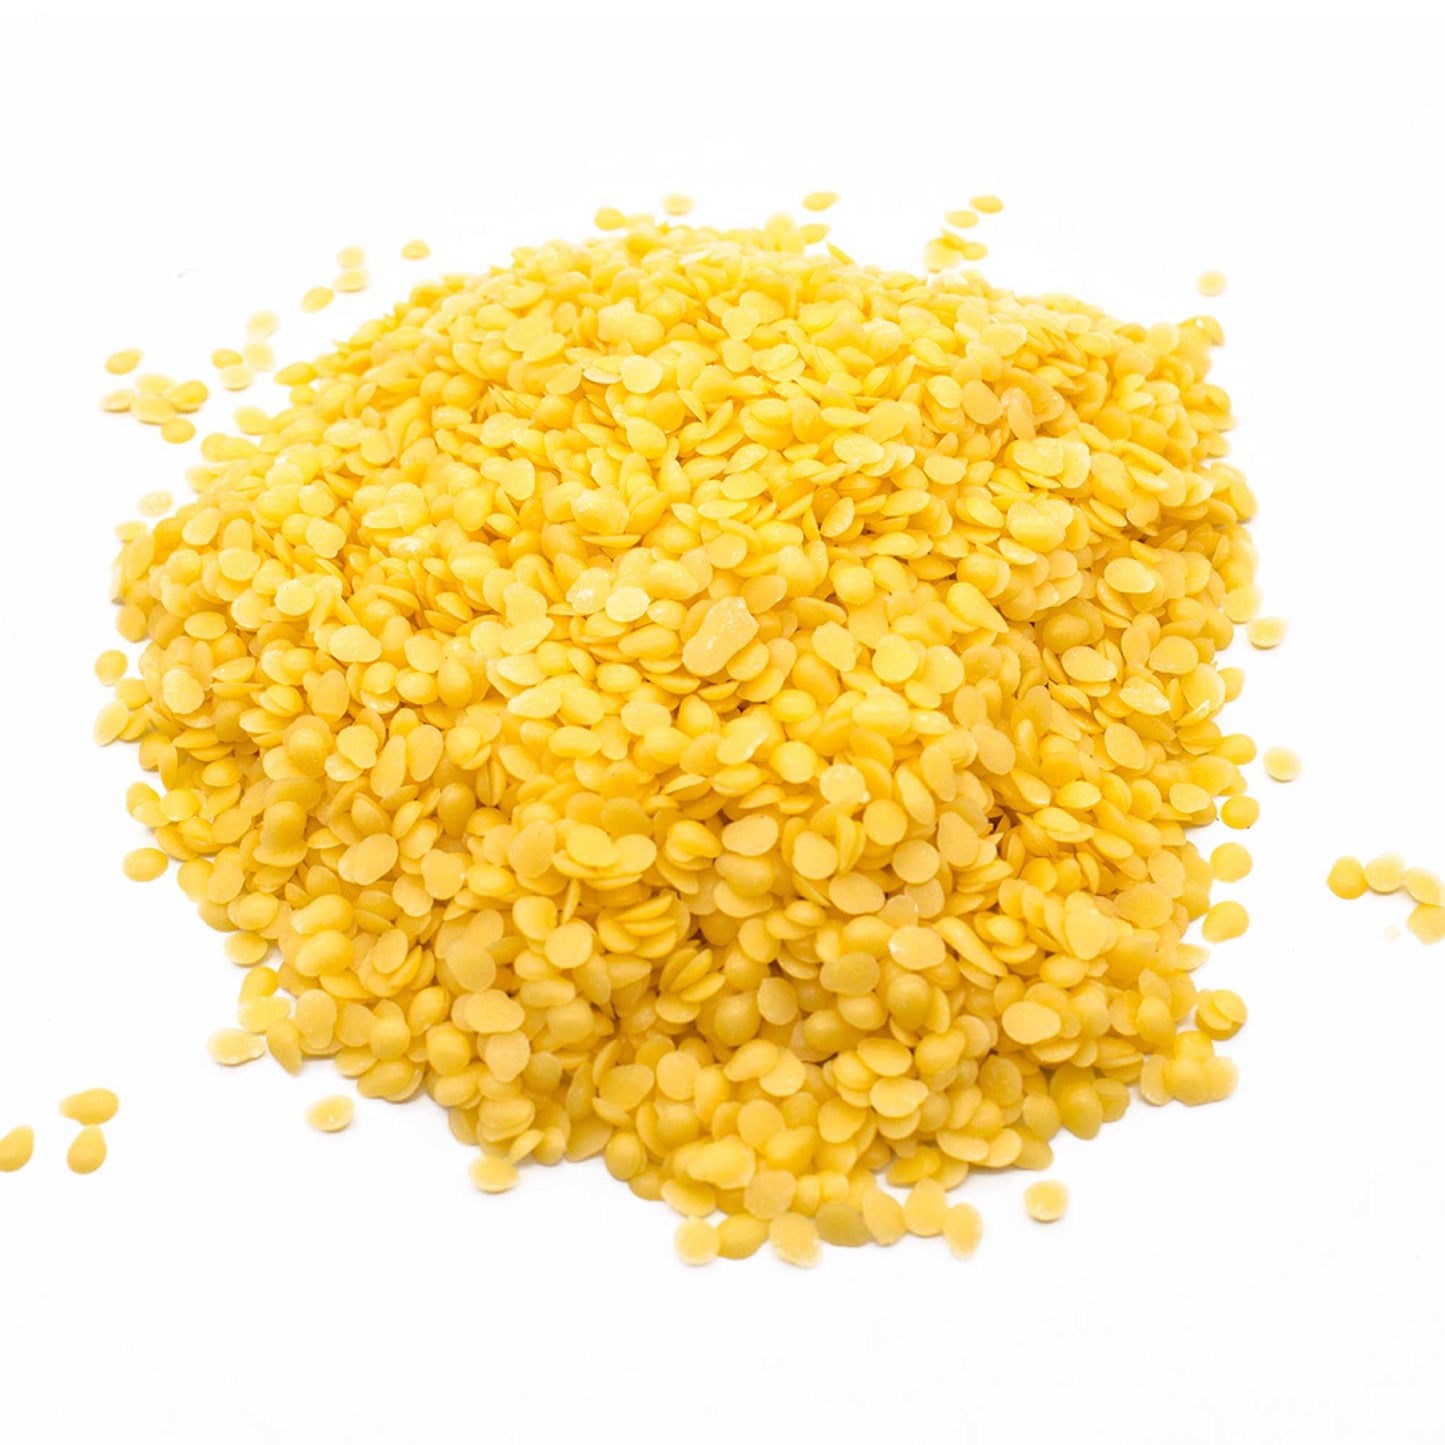 5kg Organic Beeswax Pellets Yellow Pharmaceutical Cosmetic Candle Bees Wax